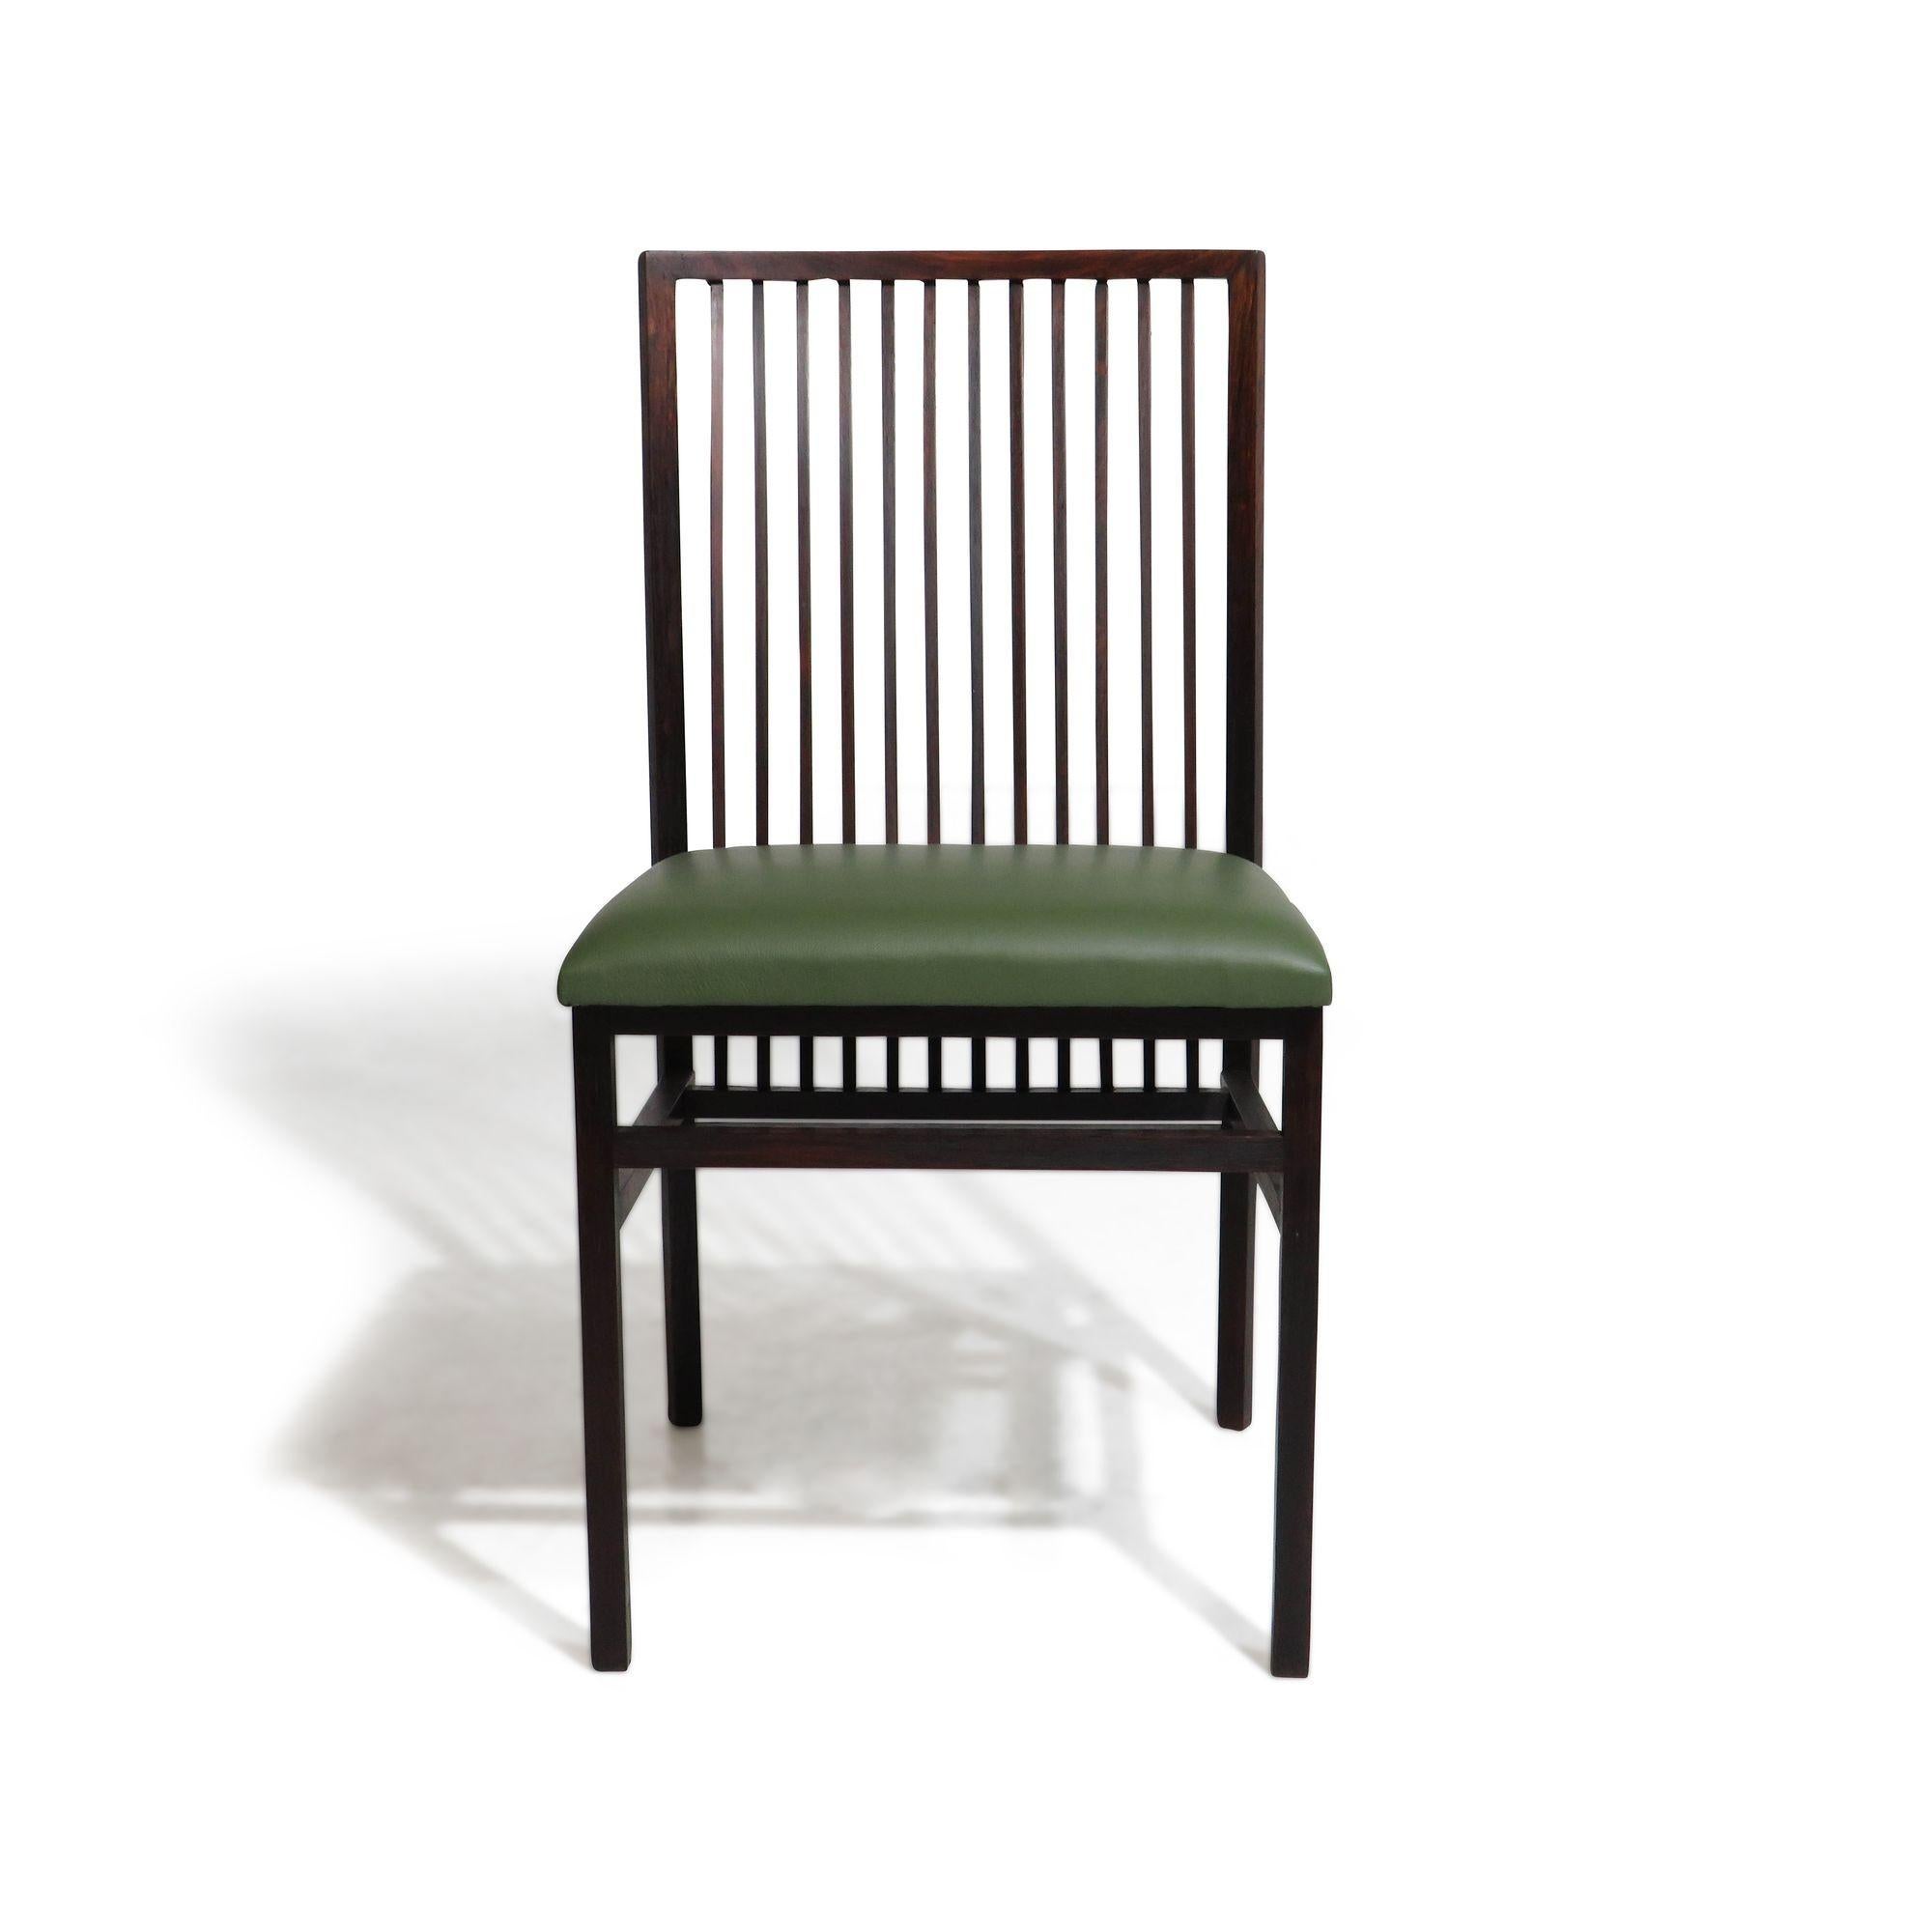 Brazilian Eight Estrutural Structural Brazil Modern Chairs For Sale